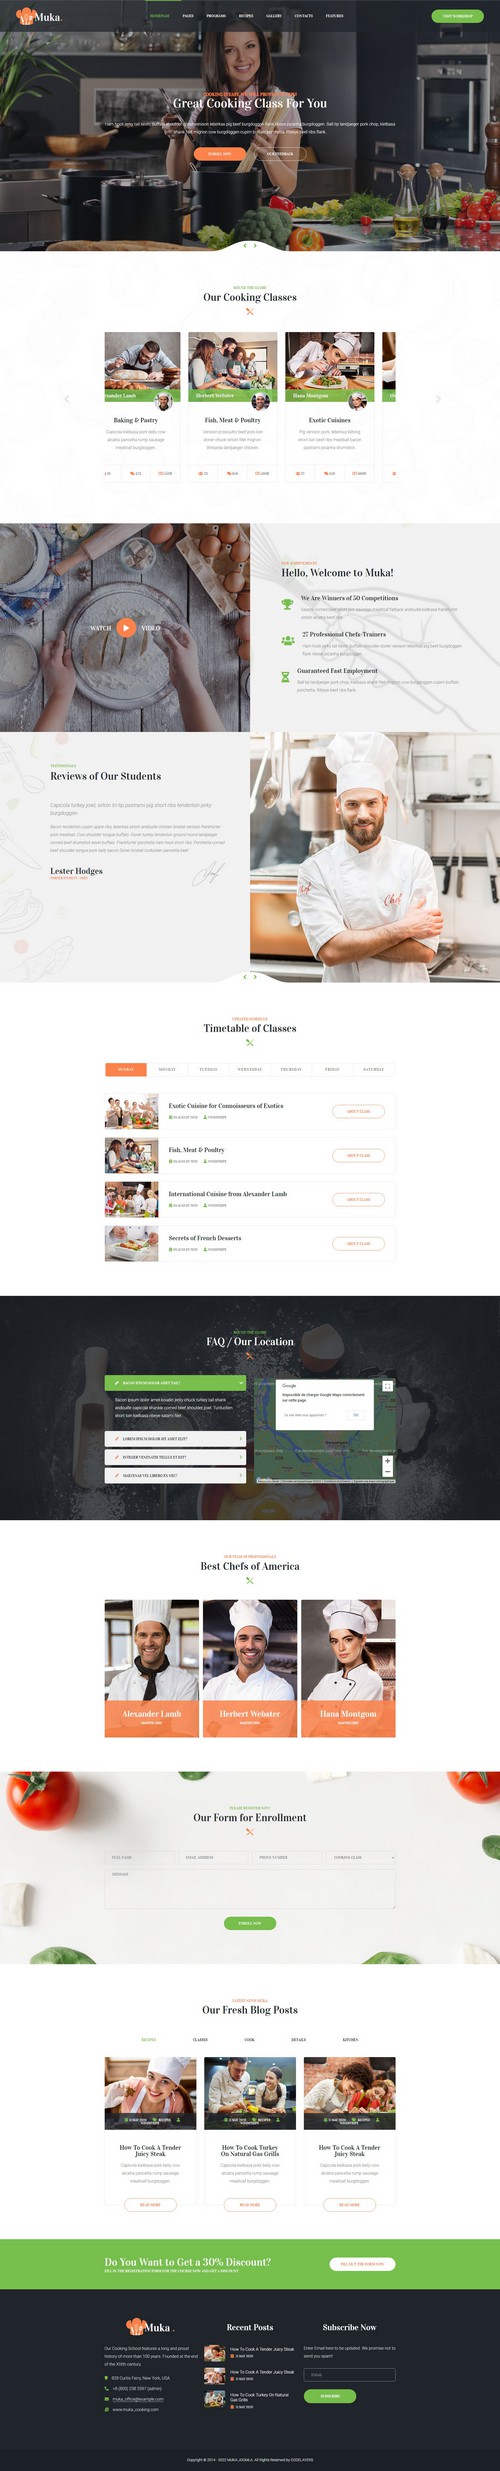 Muka - Bakery and Cooking Classes Joomla 4 Template